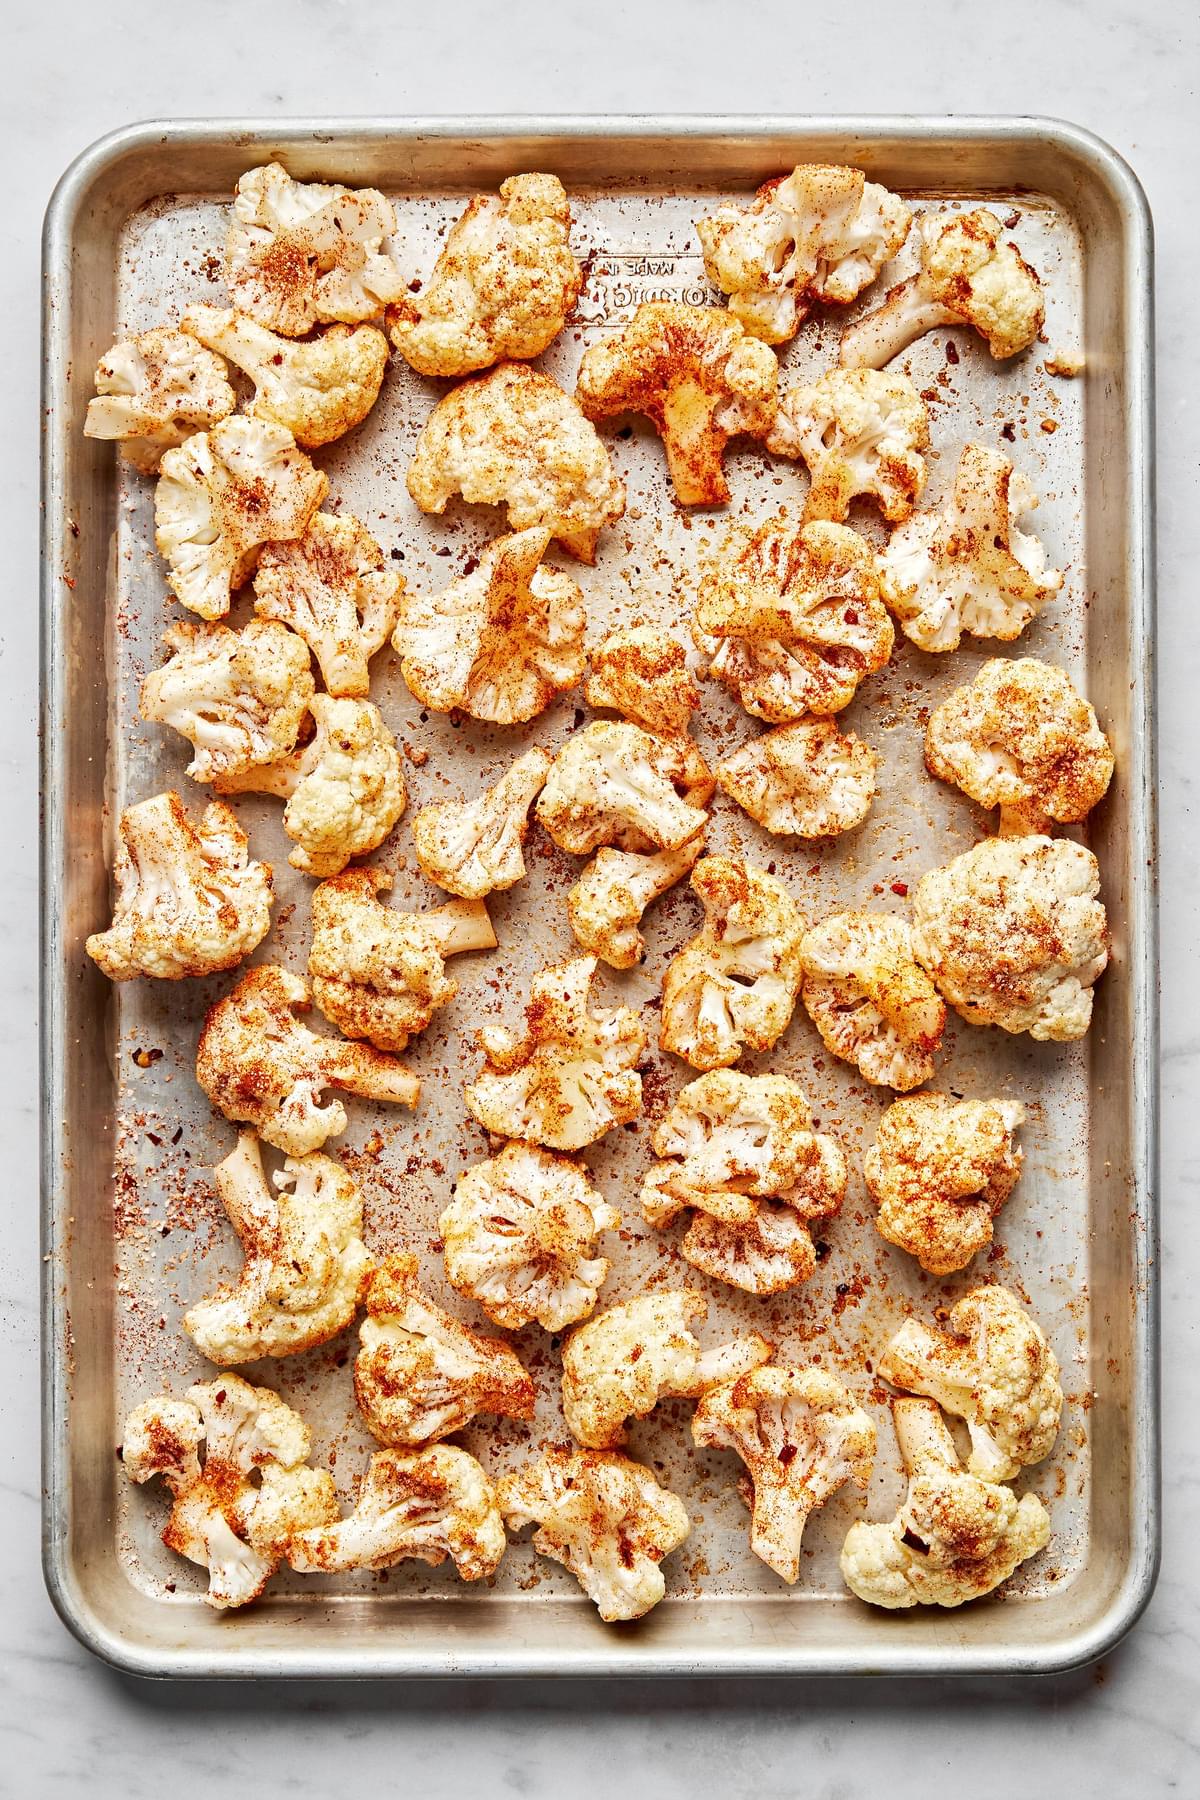 cauliflower florets tossed with olive oil, salt, garlic powder, smoked paprika and red pepper flakes on a baking sheet